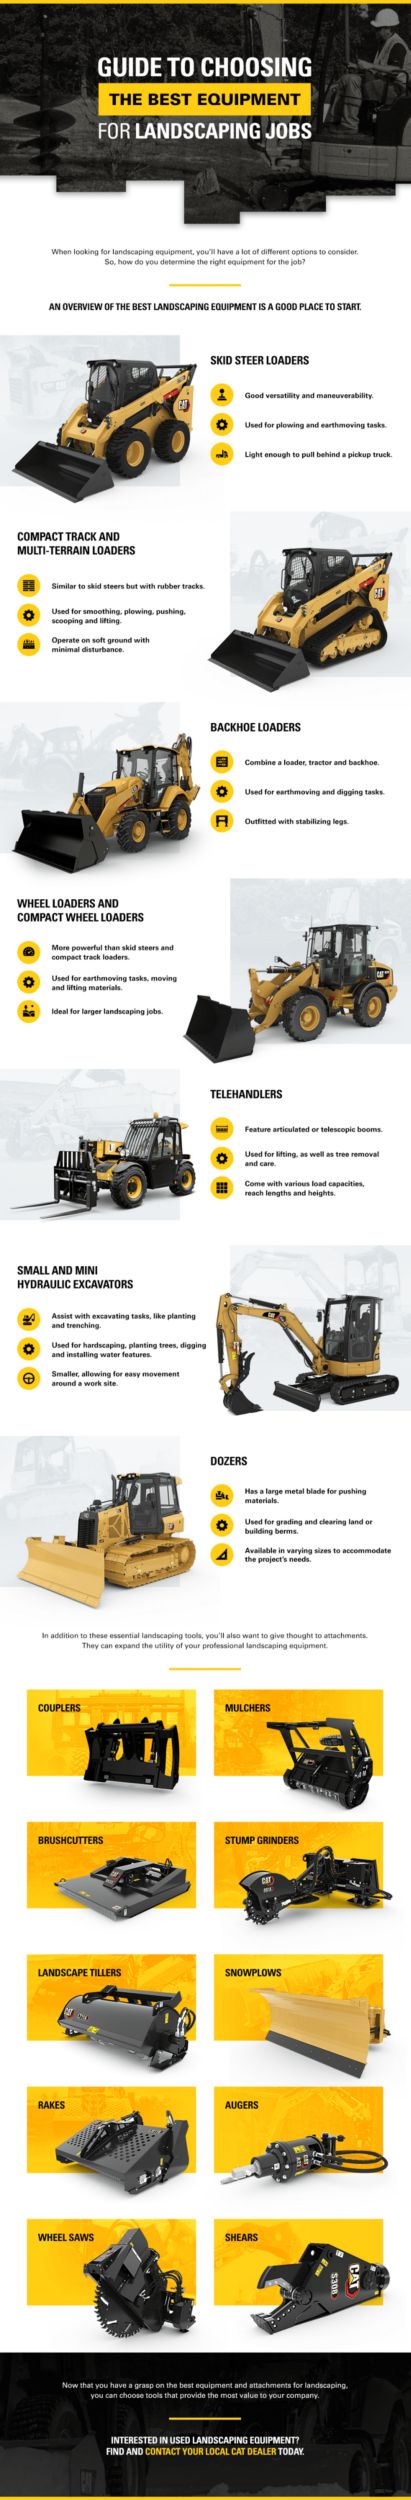 Guide To Choosing the Best Equipment for Landscaping Jobs